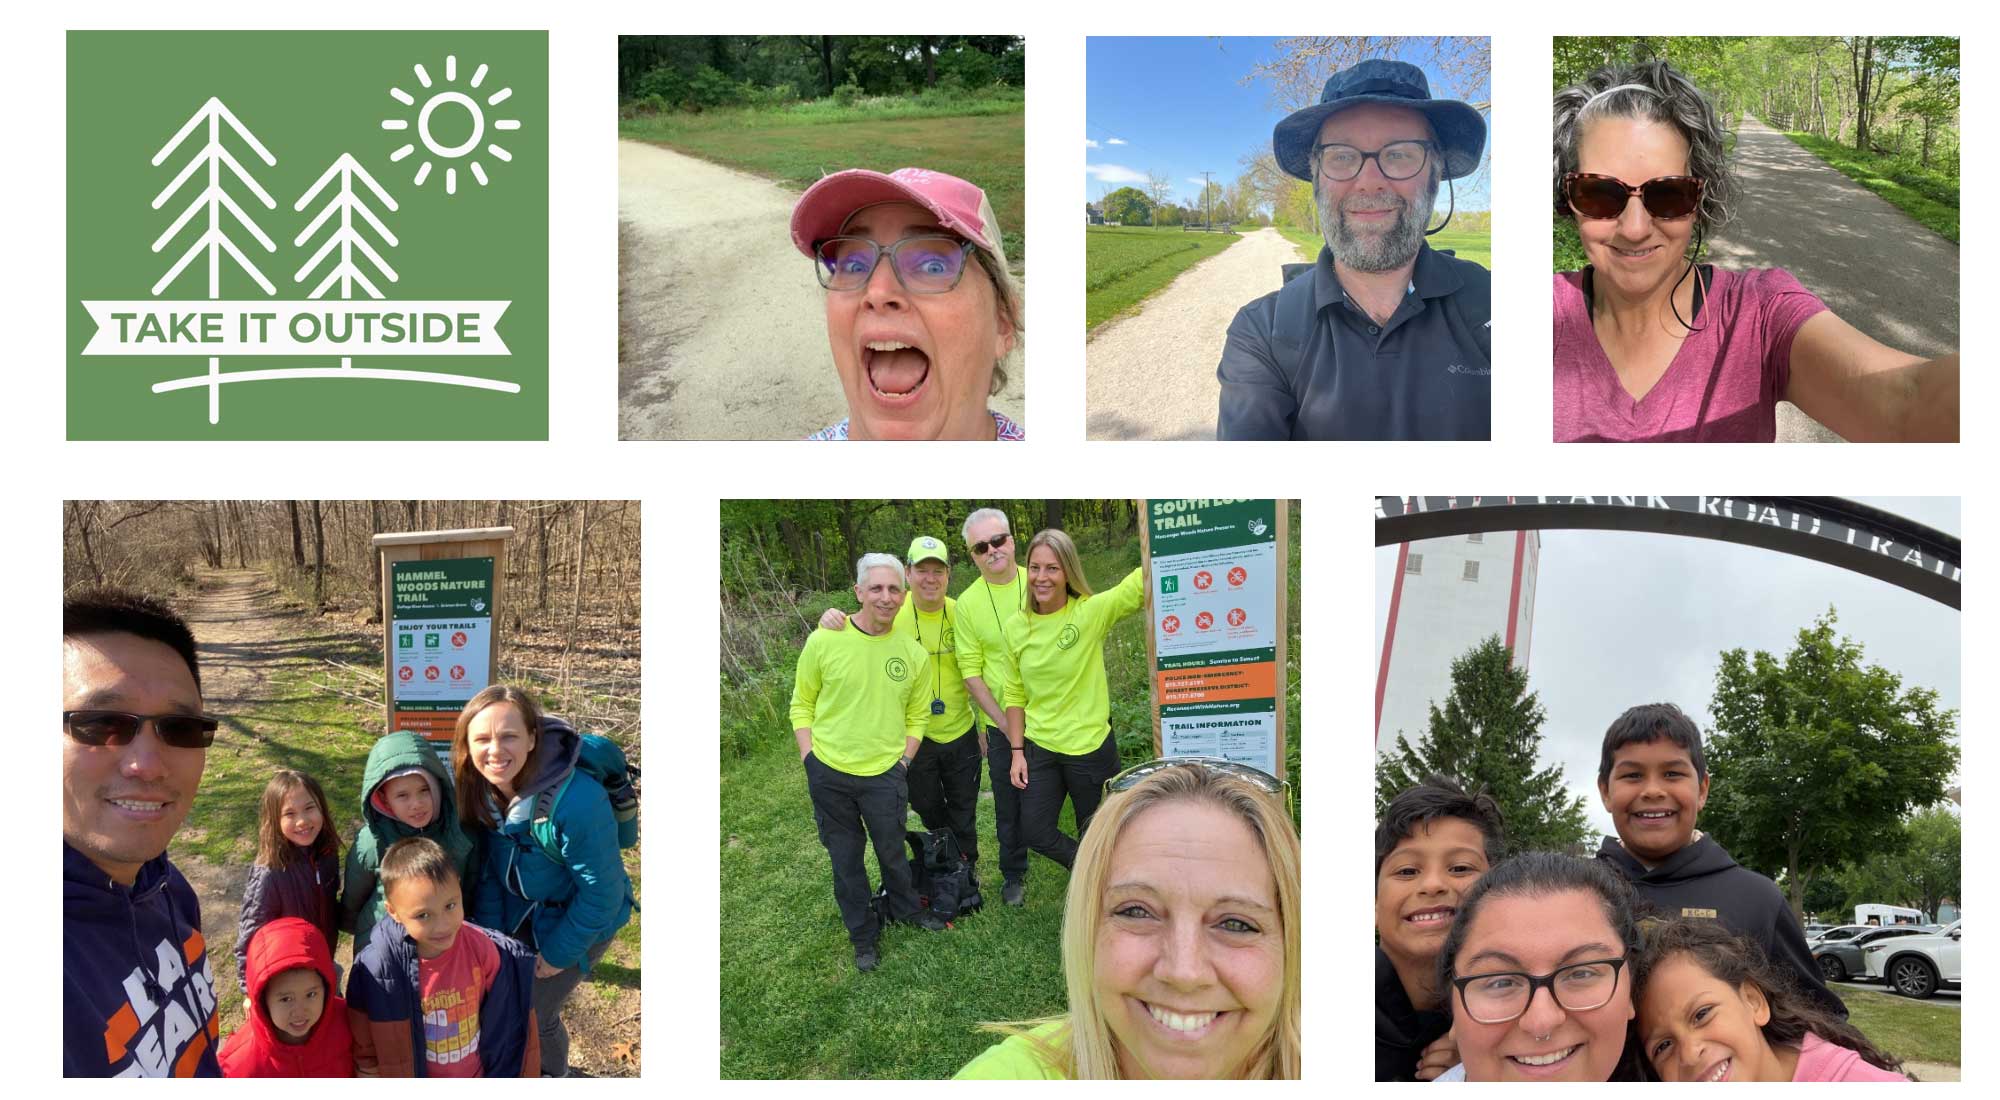 A collection of selfie photos from Take It Outside participants